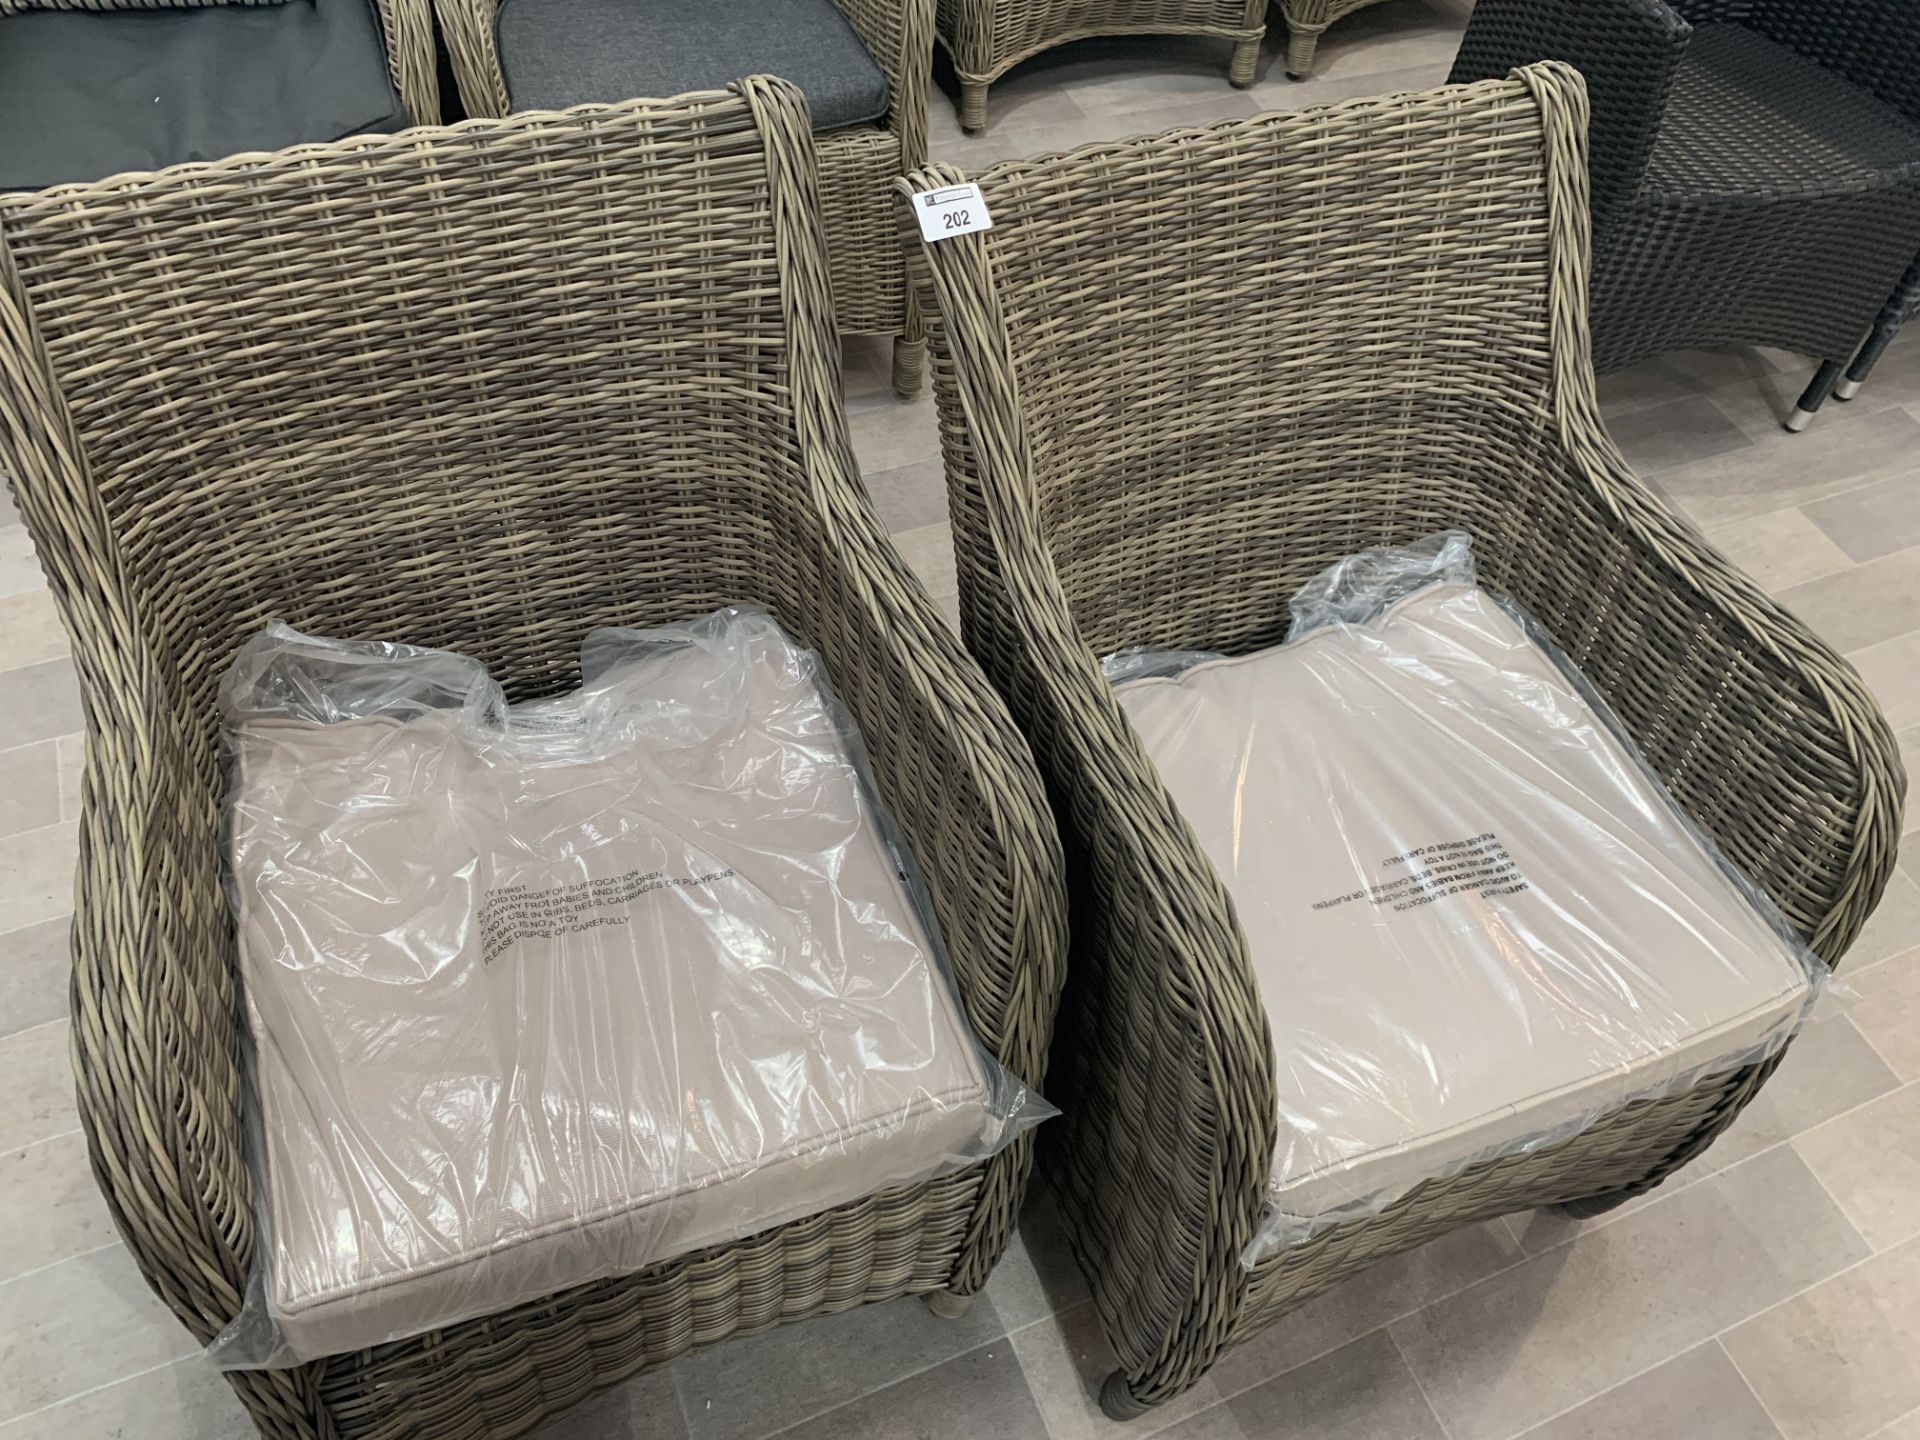 A Pair of woven Maze Rattan arm chairs with cushion seats